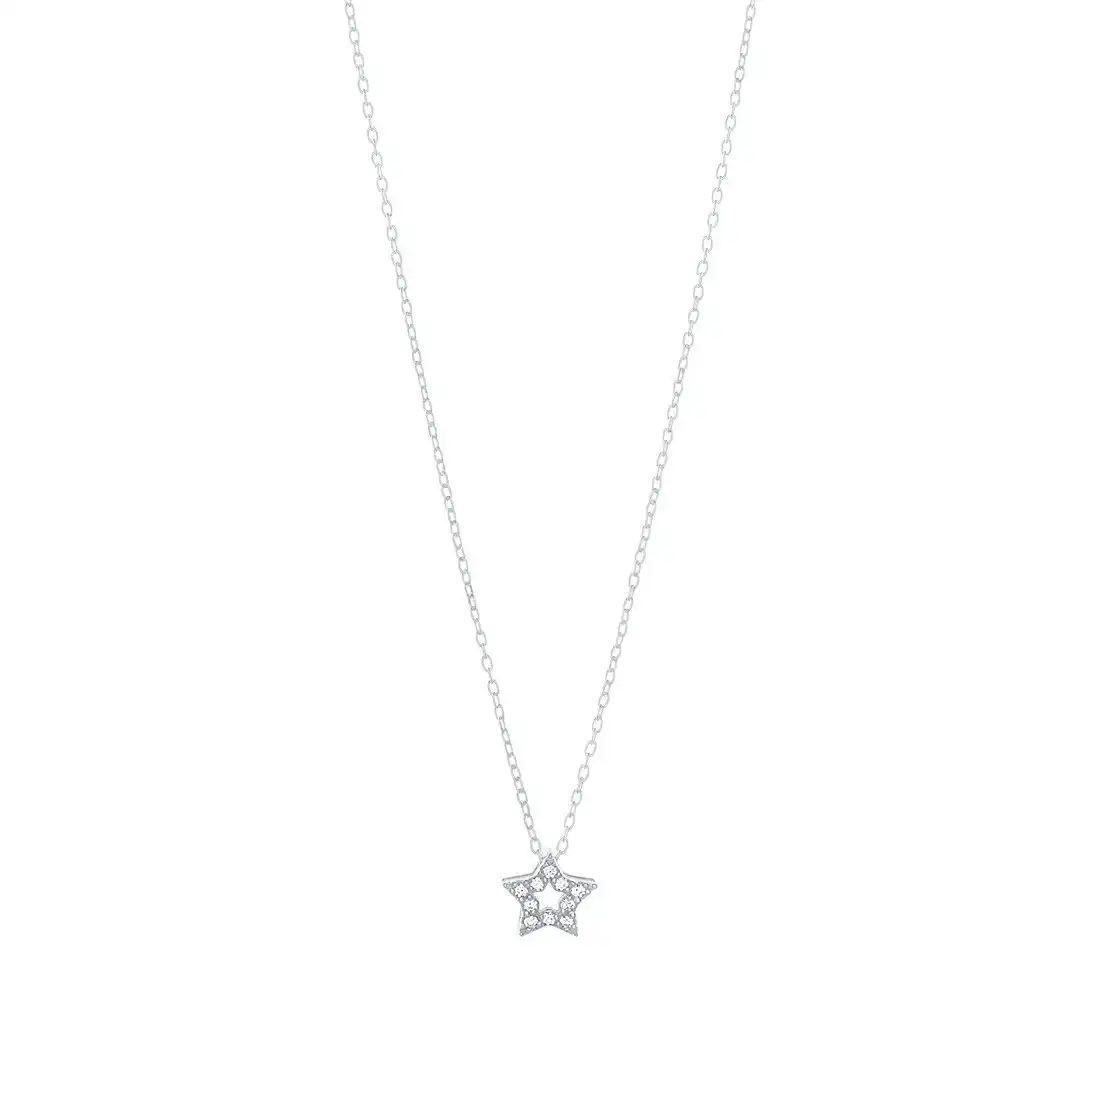 40cm Open Star Necklace with Cubic Zirconia in Sterling Silver